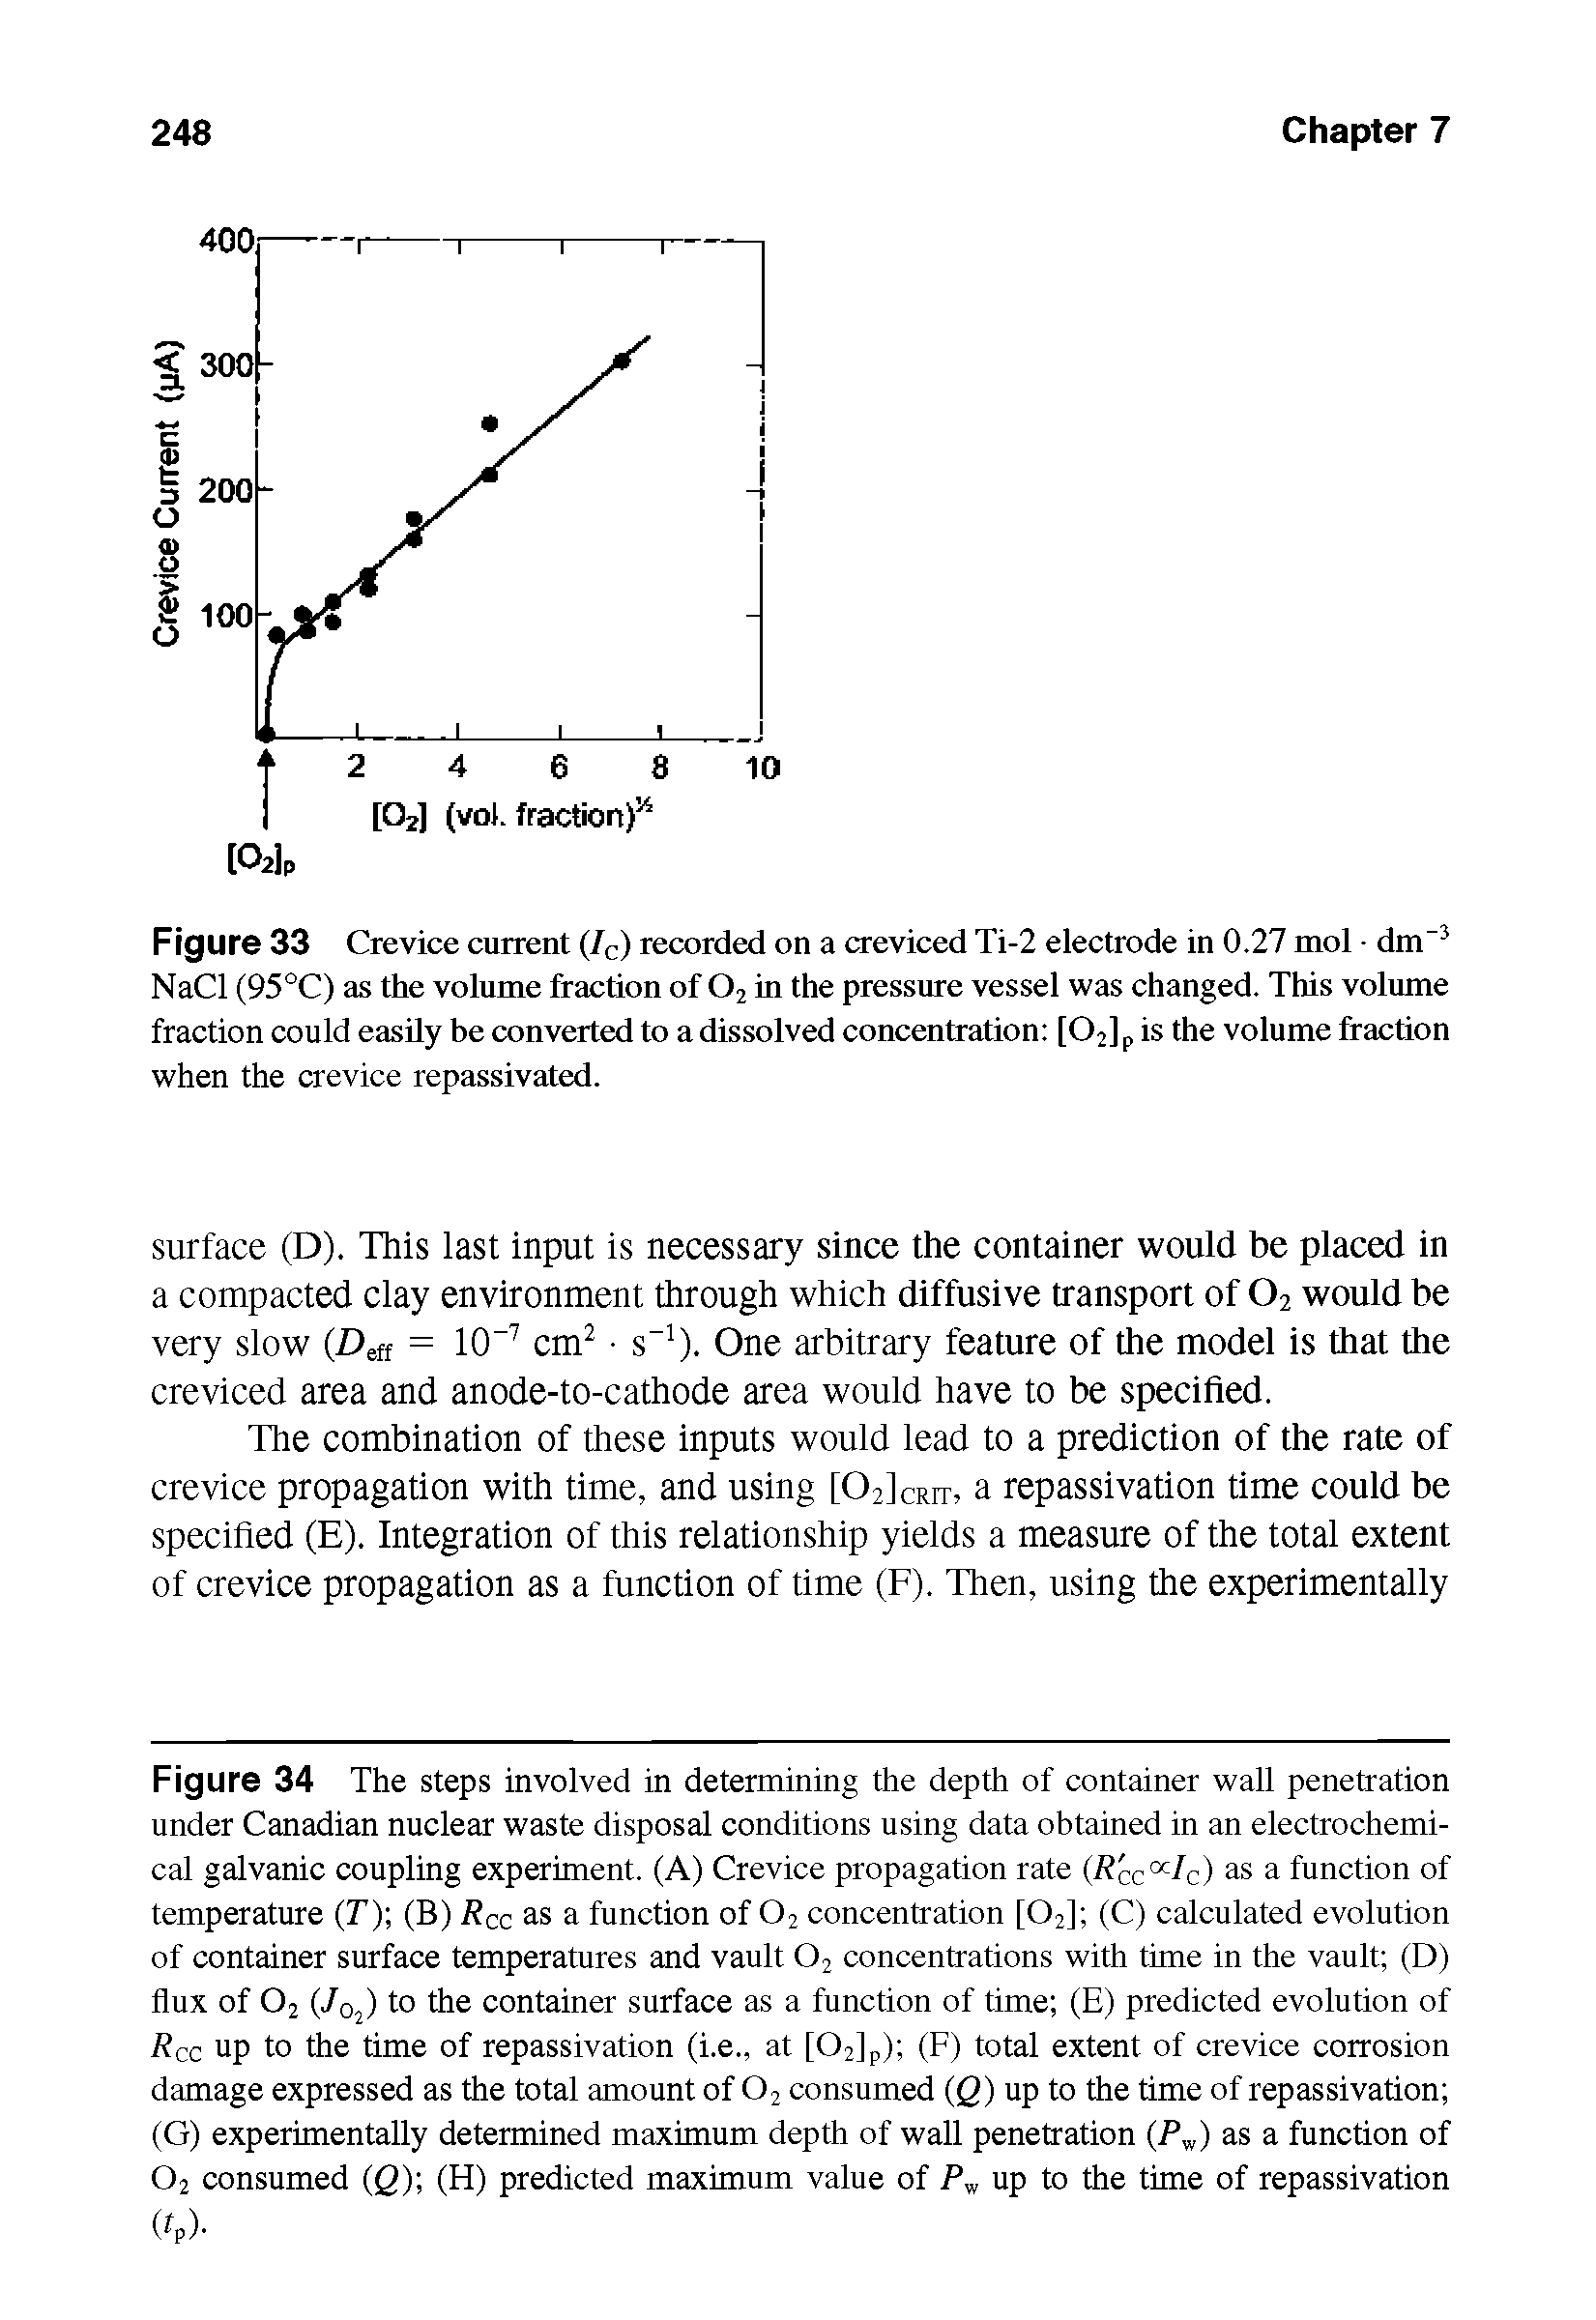 Figure 34 The steps involved in determining the depth of container wall penetration under Canadian nuclear waste disposal conditions using data obtained in an electrochemical galvanic coupling experiment. (A) Crevice propagation rate (R cc Ic) as a function of temperature (T) (B) RCc as a function of 02 concentration [02] (C) calculated evolution of container surface temperatures and vault 02 concentrations with time in the vault (D) flux of 02 (Jo2) to the container surface as a function of time (E) predicted evolution of Rcc up to the time of repassivation (i.e., at [02]p) (F) total extent of crevice corrosion damage expressed as the total amount of 02 consumed (Q) up to the time of repassivation (G) experimentally determined maximum depth of wall penetration (Pw) as a function of 02 consumed (Q) (H) predicted maximum value of Pw up to the time of repassivation (fP)-...